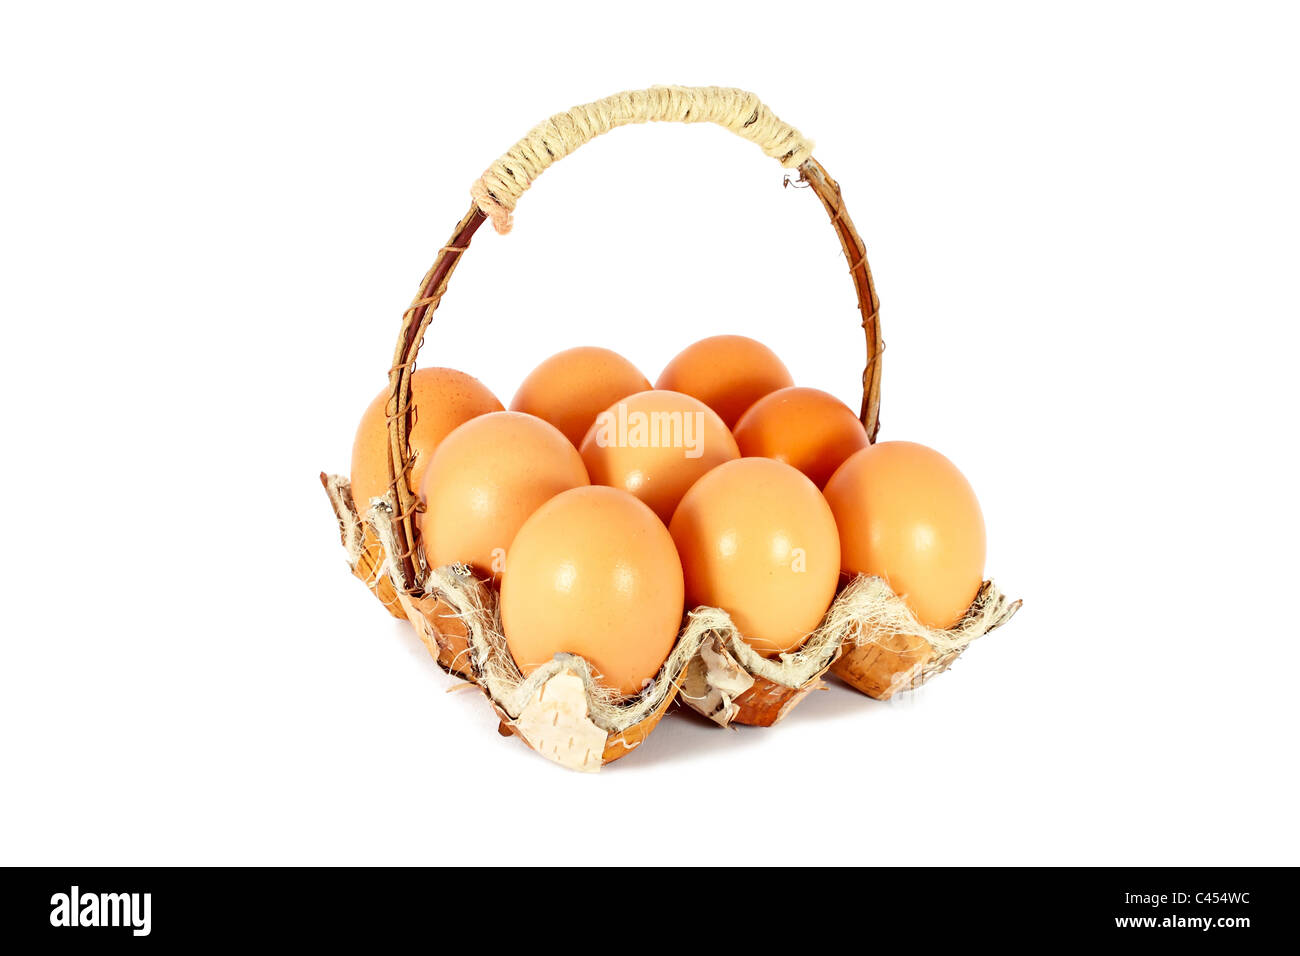 Chicken eggs in a basket made of natural materials, isolated Stock Photo